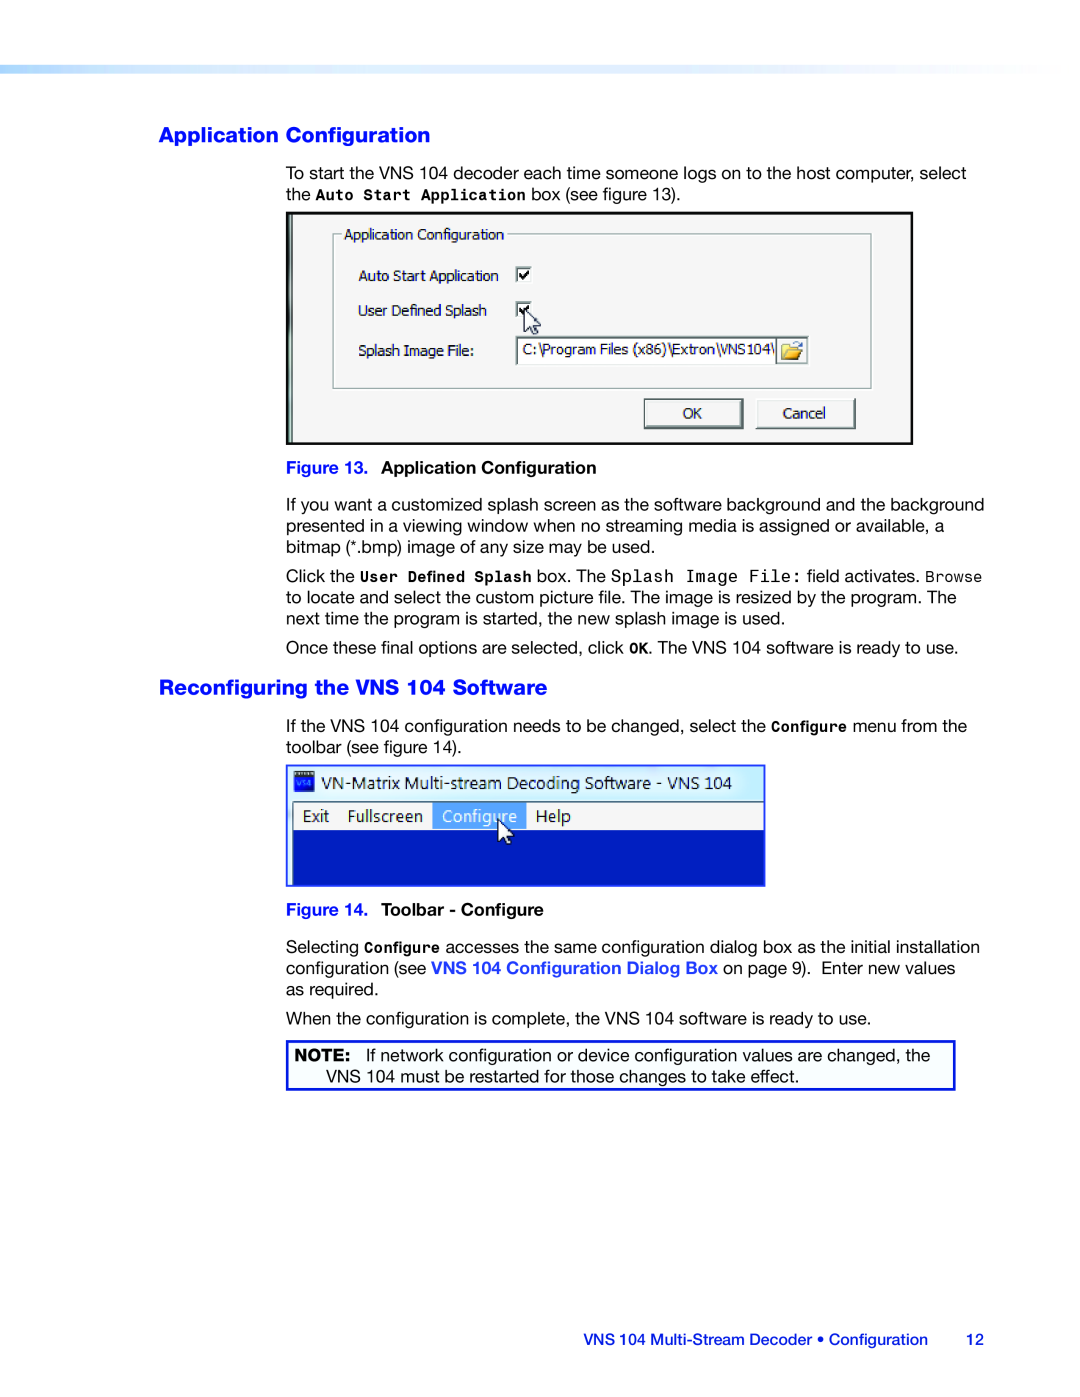 Extron electronic manual Application Configuration, Reconfiguring the VNS 104 Software, Toolbar - Configure 